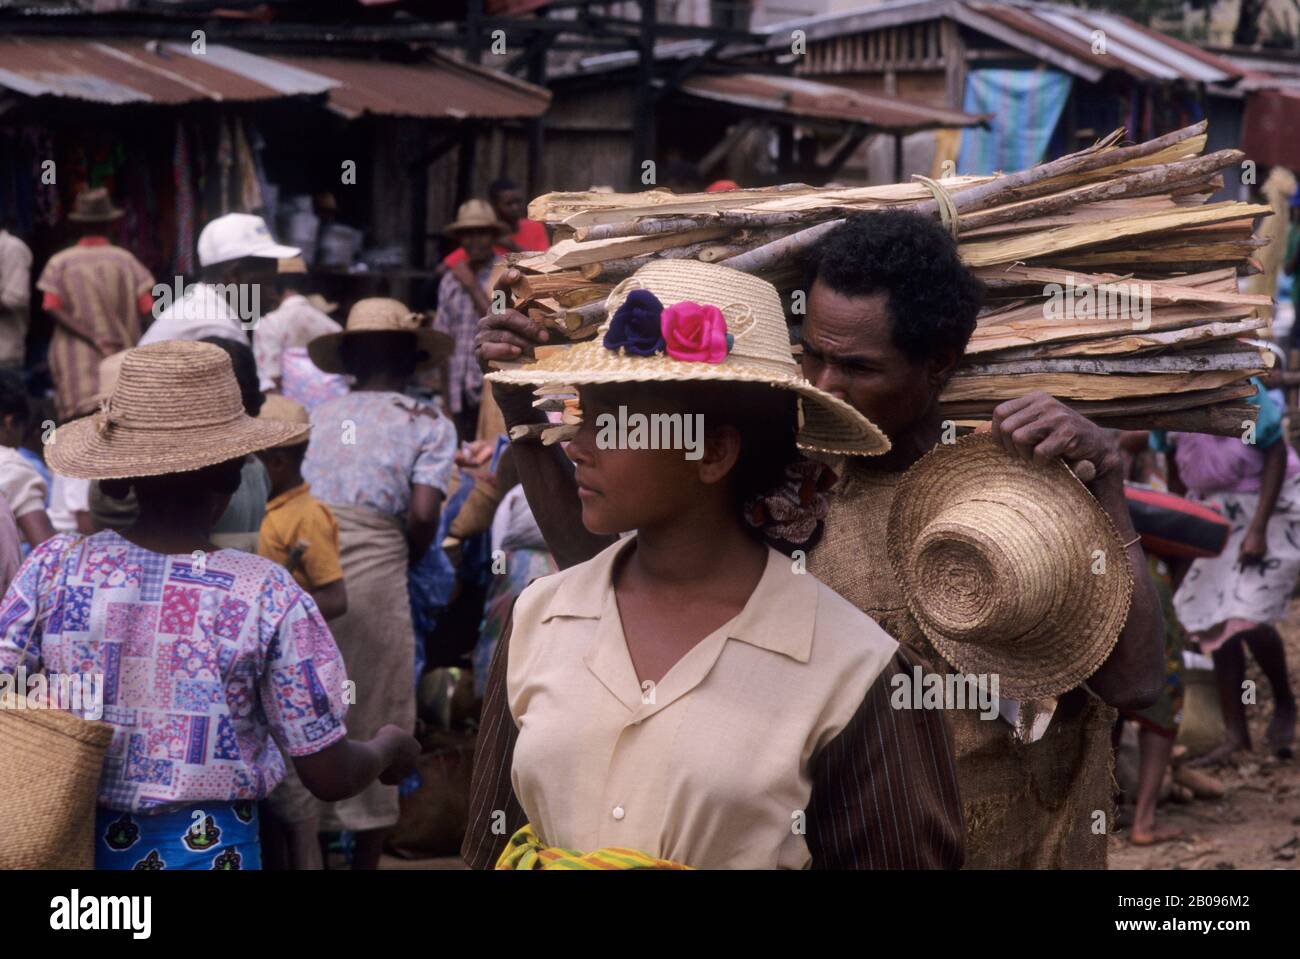 Market scene at the local farmers market in Mananjary in eastern Madagascar Stock Photo